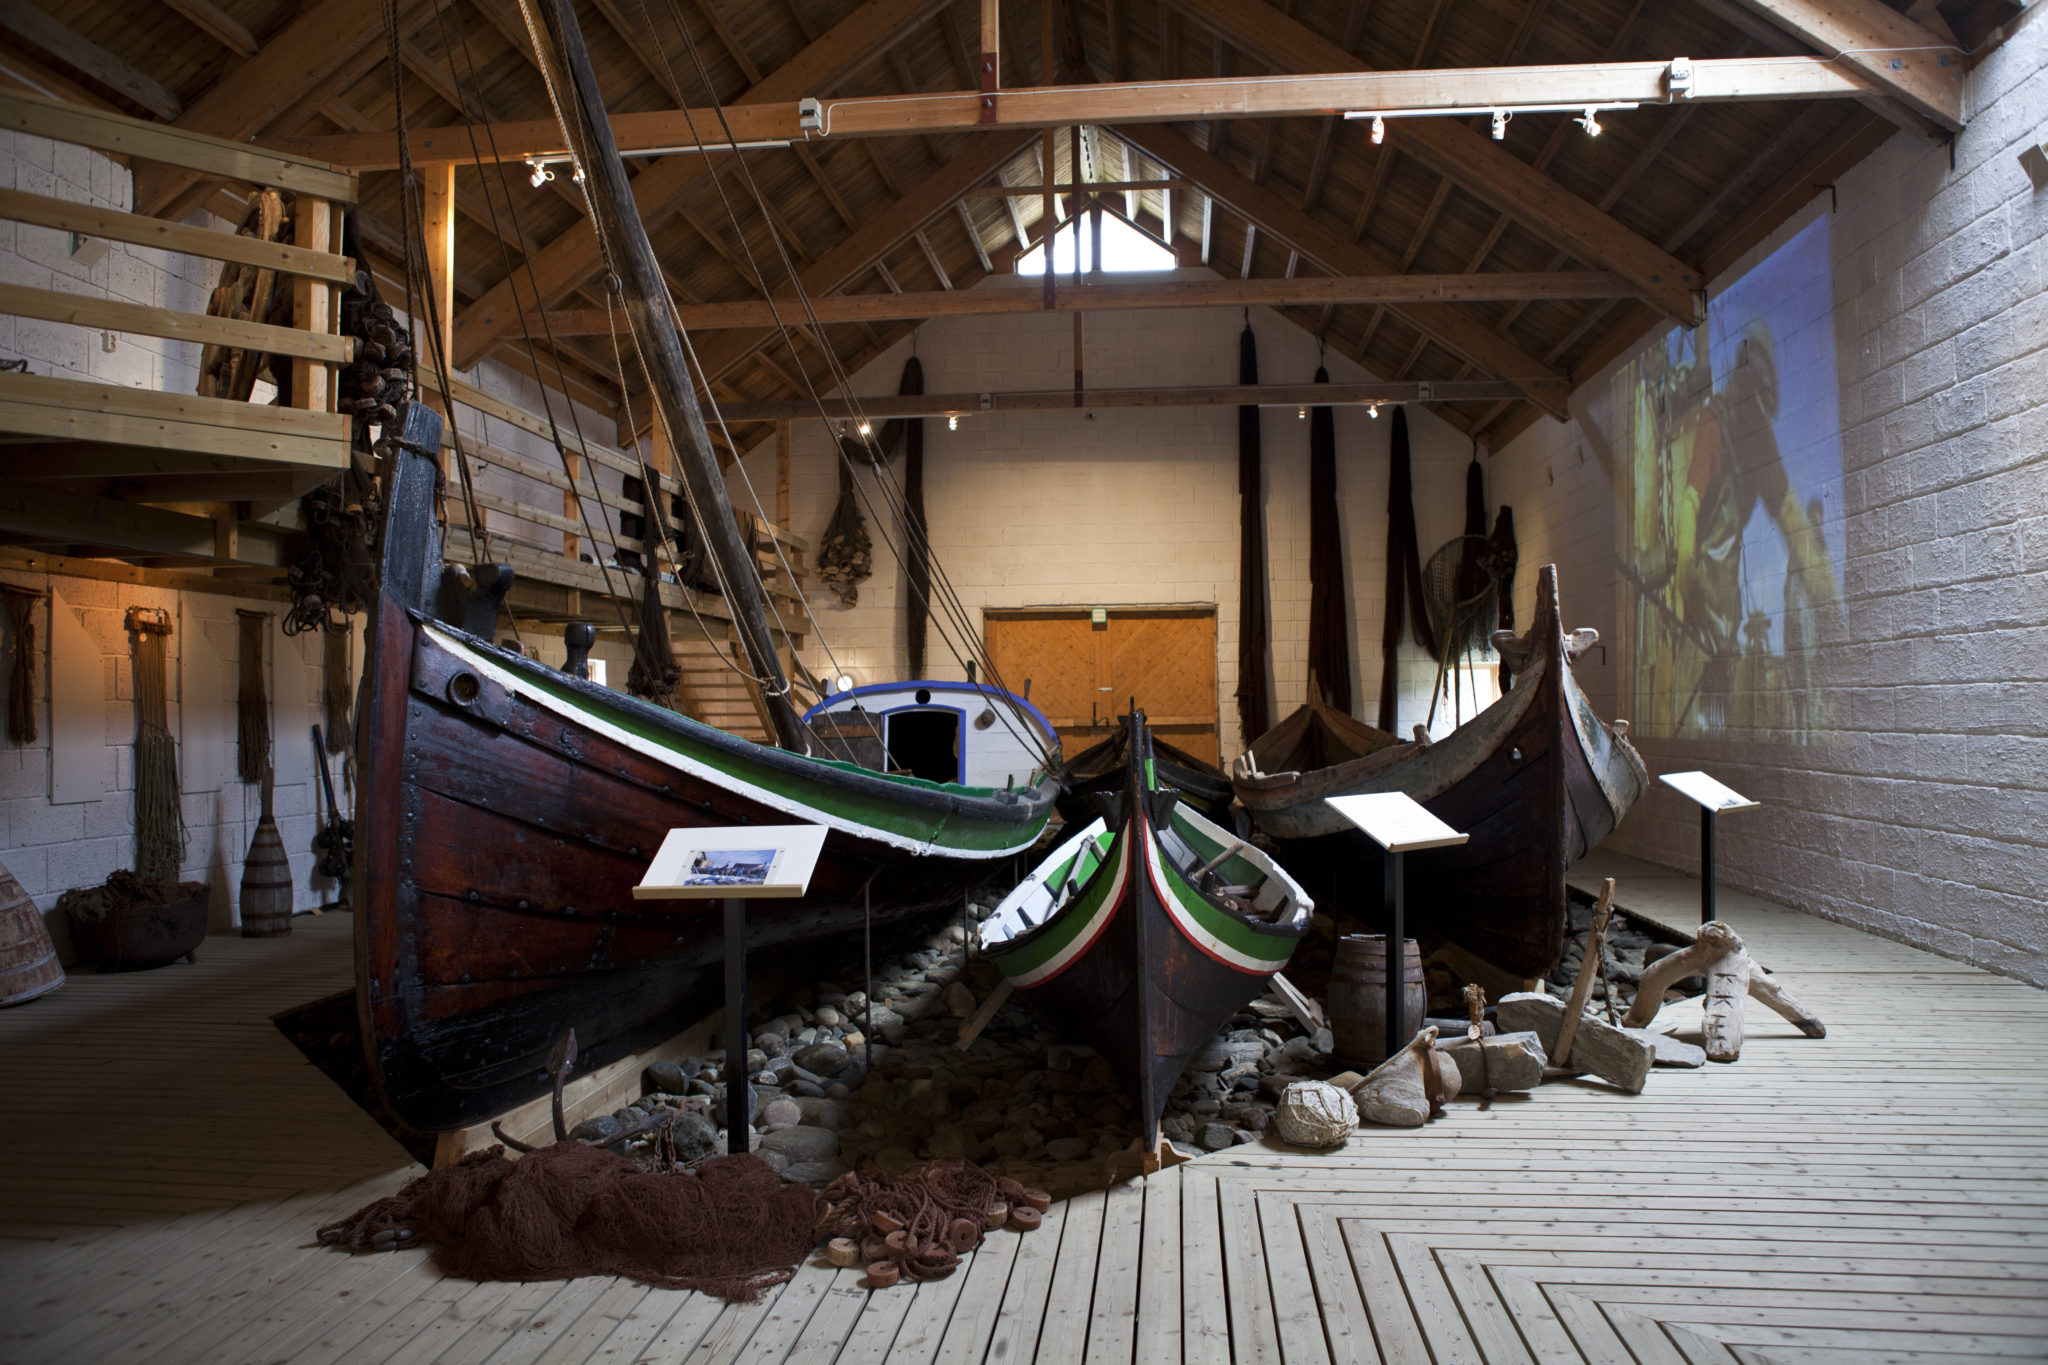 A collection of Nordland boats in the museum © Hans Arne Paulsen